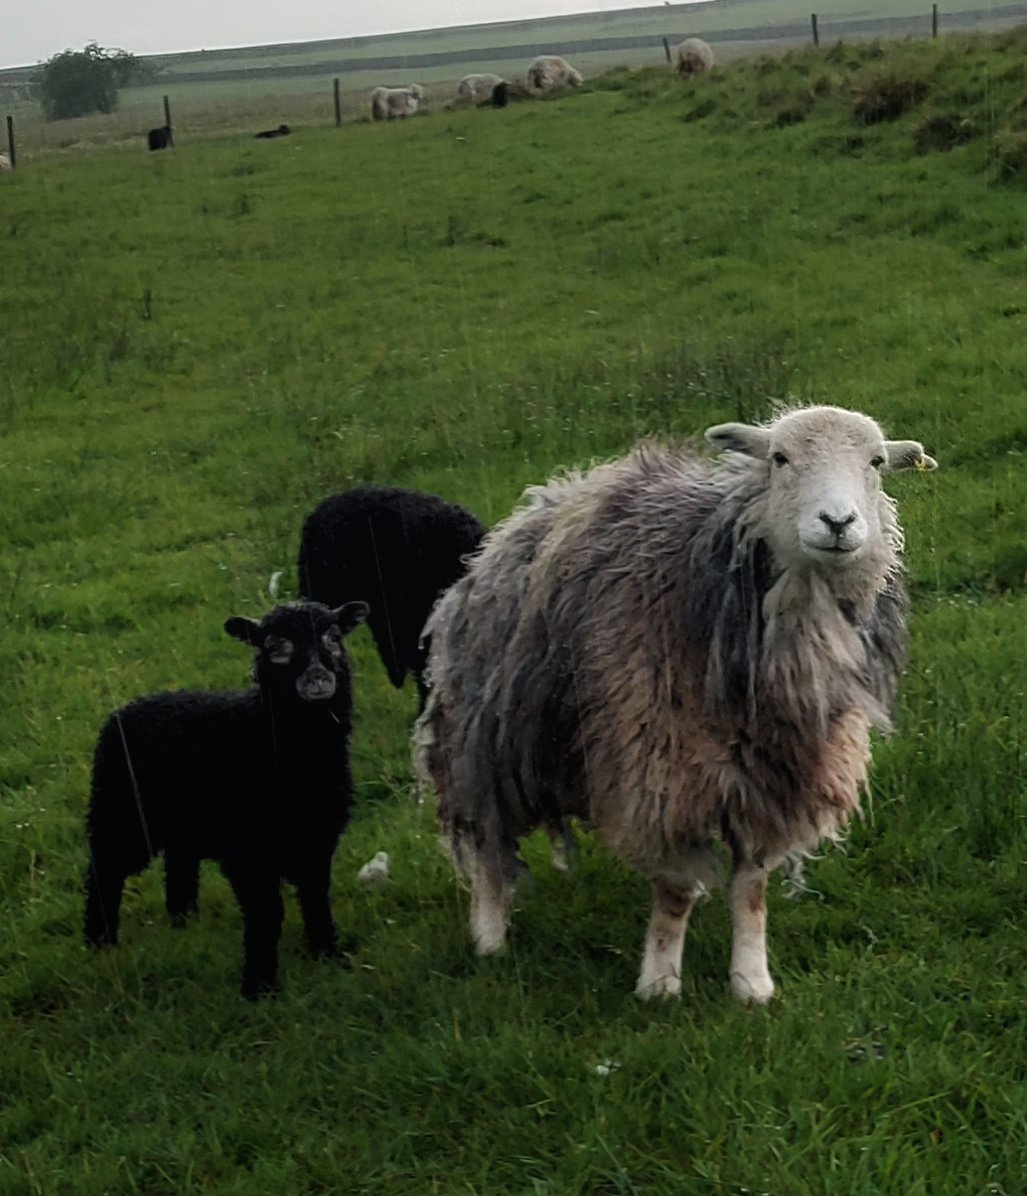 Heavy rain this afternoon on the the rounds being picked up by the camera lens. The sheep didn't seem to mind. Bracken had an additional lamb with her. Hers just behind her, the little one soon realised it wasn't mum and headed off to find her 💦 #herdwicks #heavyrain #hillfarm